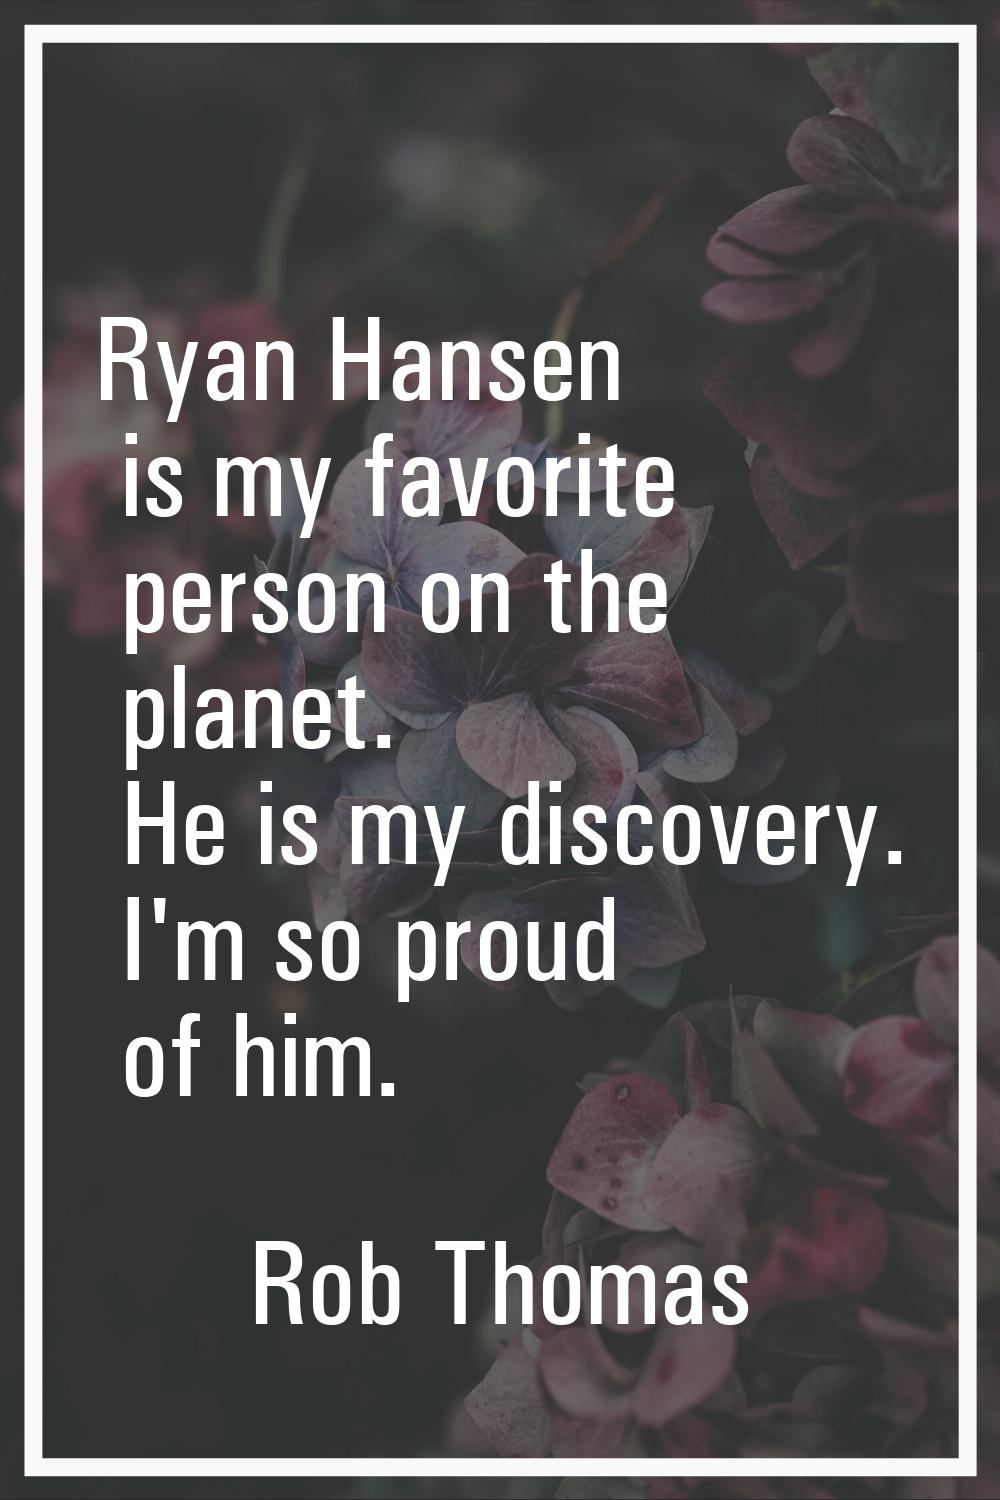 Ryan Hansen is my favorite person on the planet. He is my discovery. I'm so proud of him.